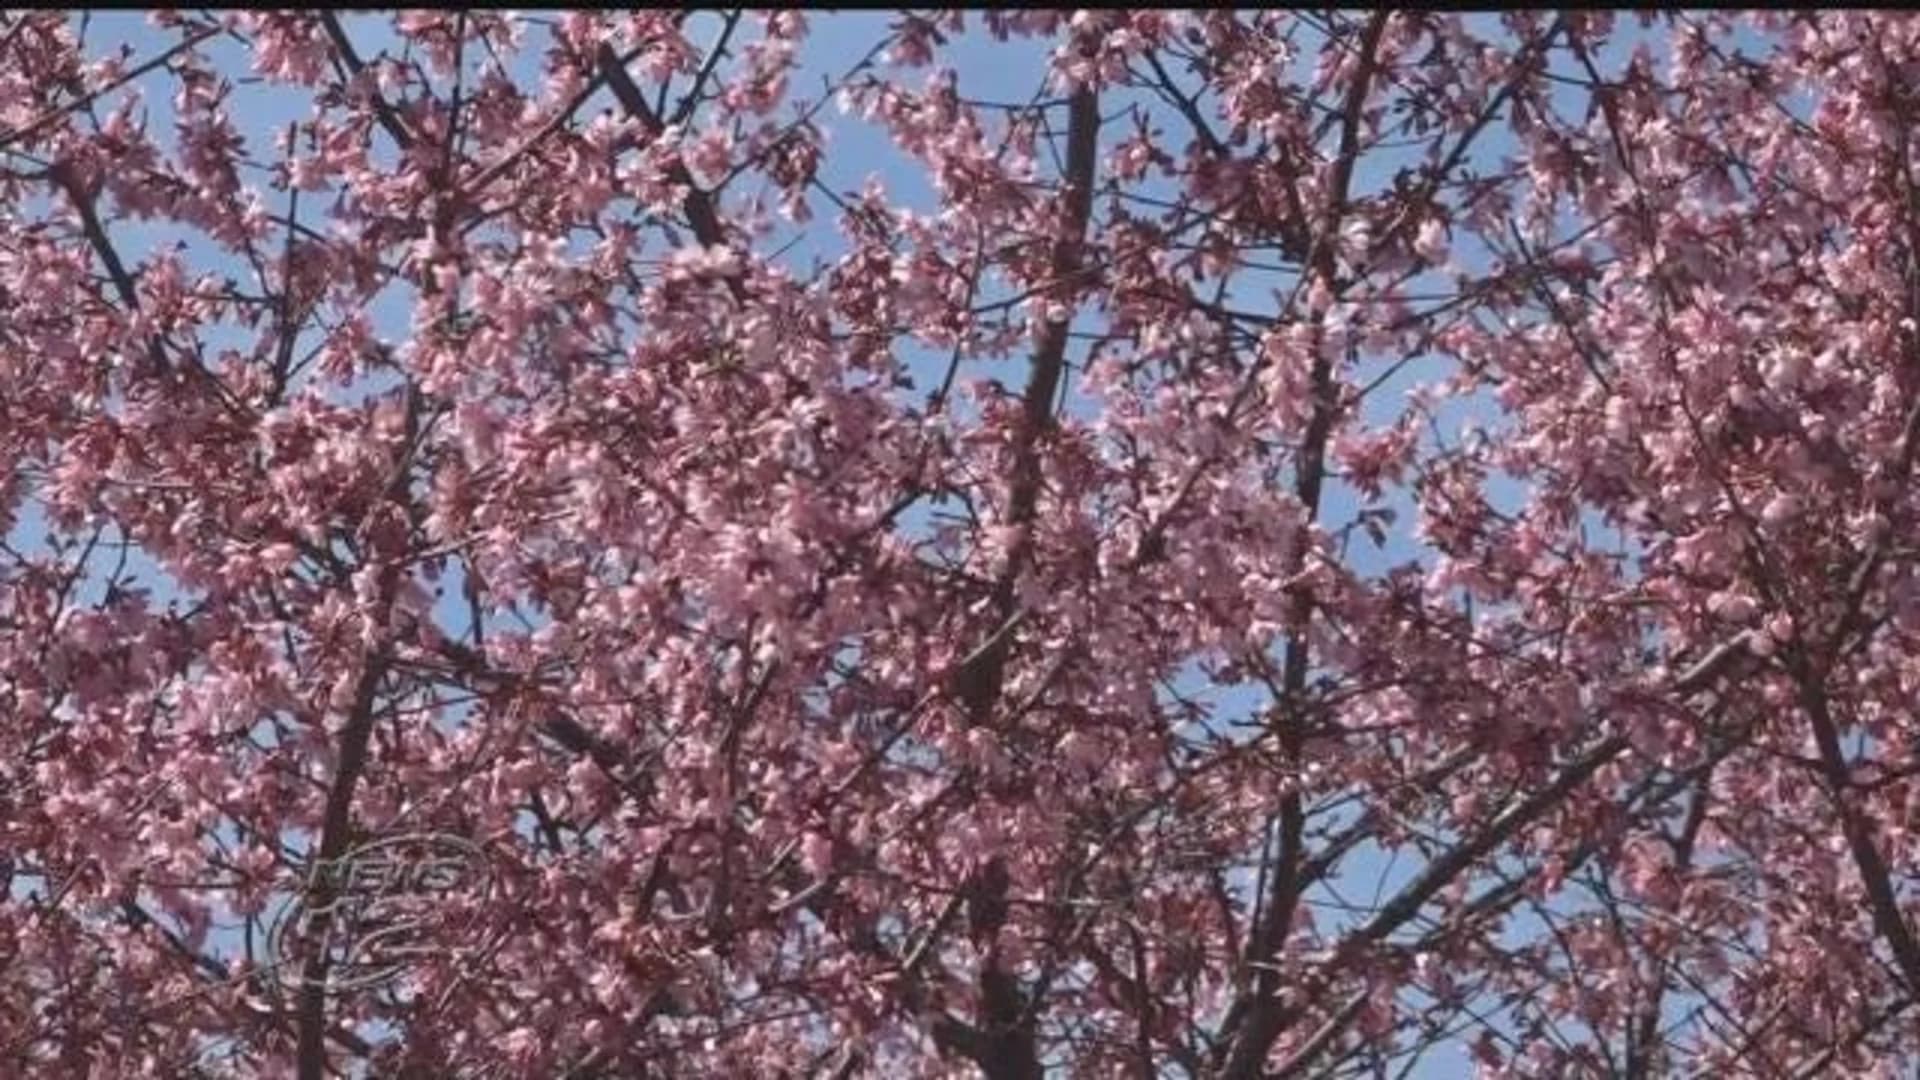 Newark’s cherry blossom festival set for this weekend